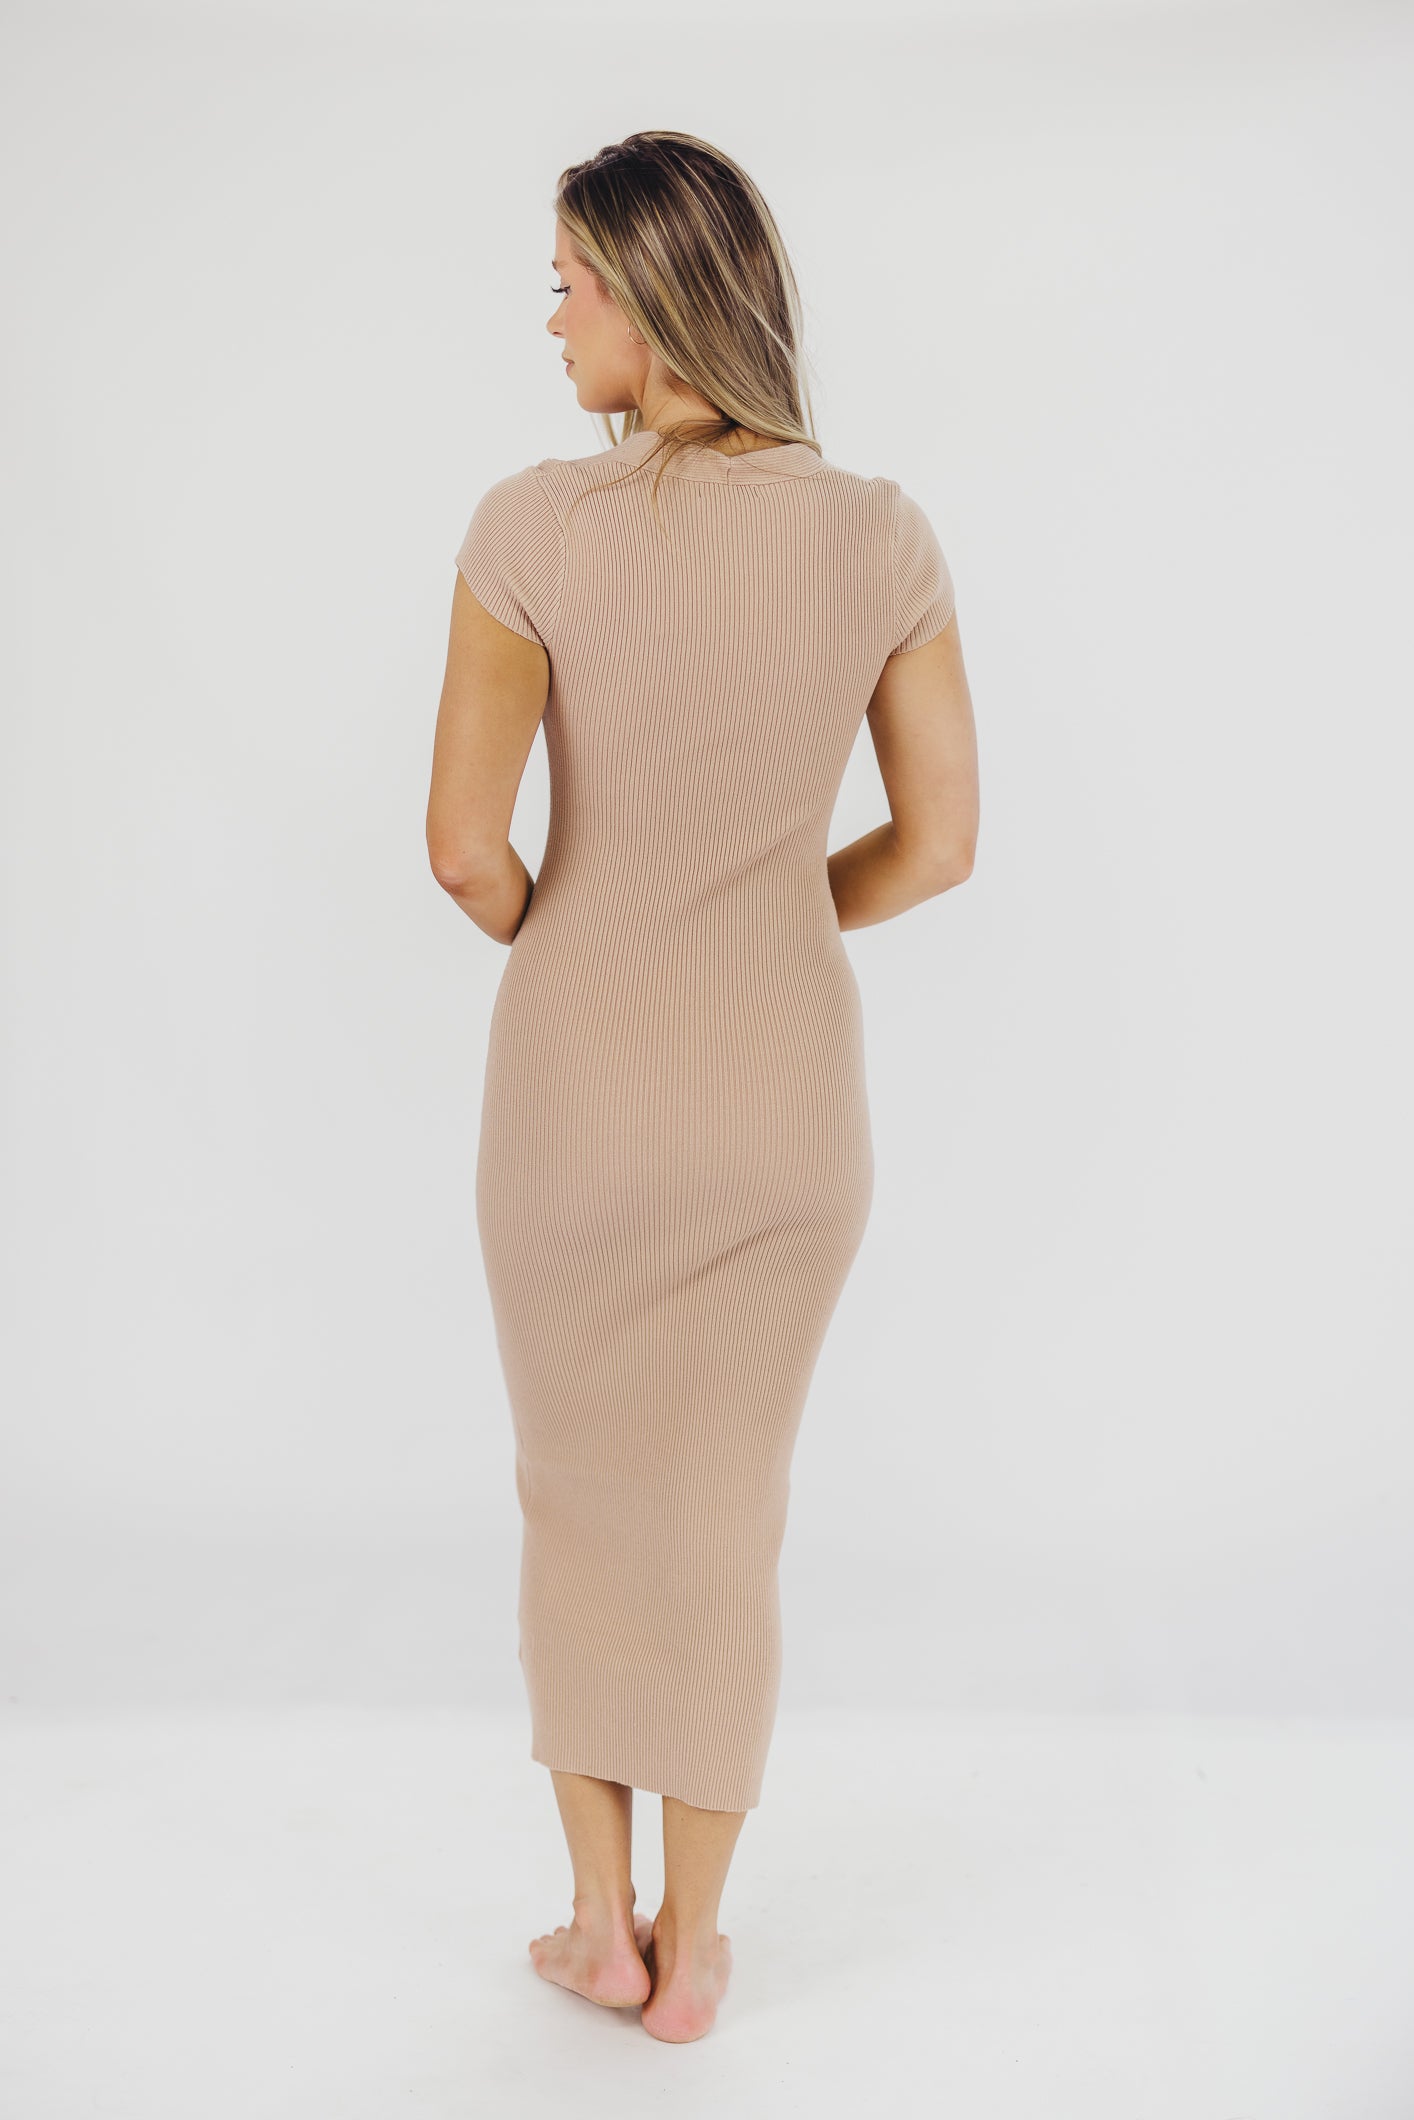 Wren Ribbed Knit Maxi Dress with Square Neckline in Dusty Blush (XS-XL) - Worth Collective Exclusive